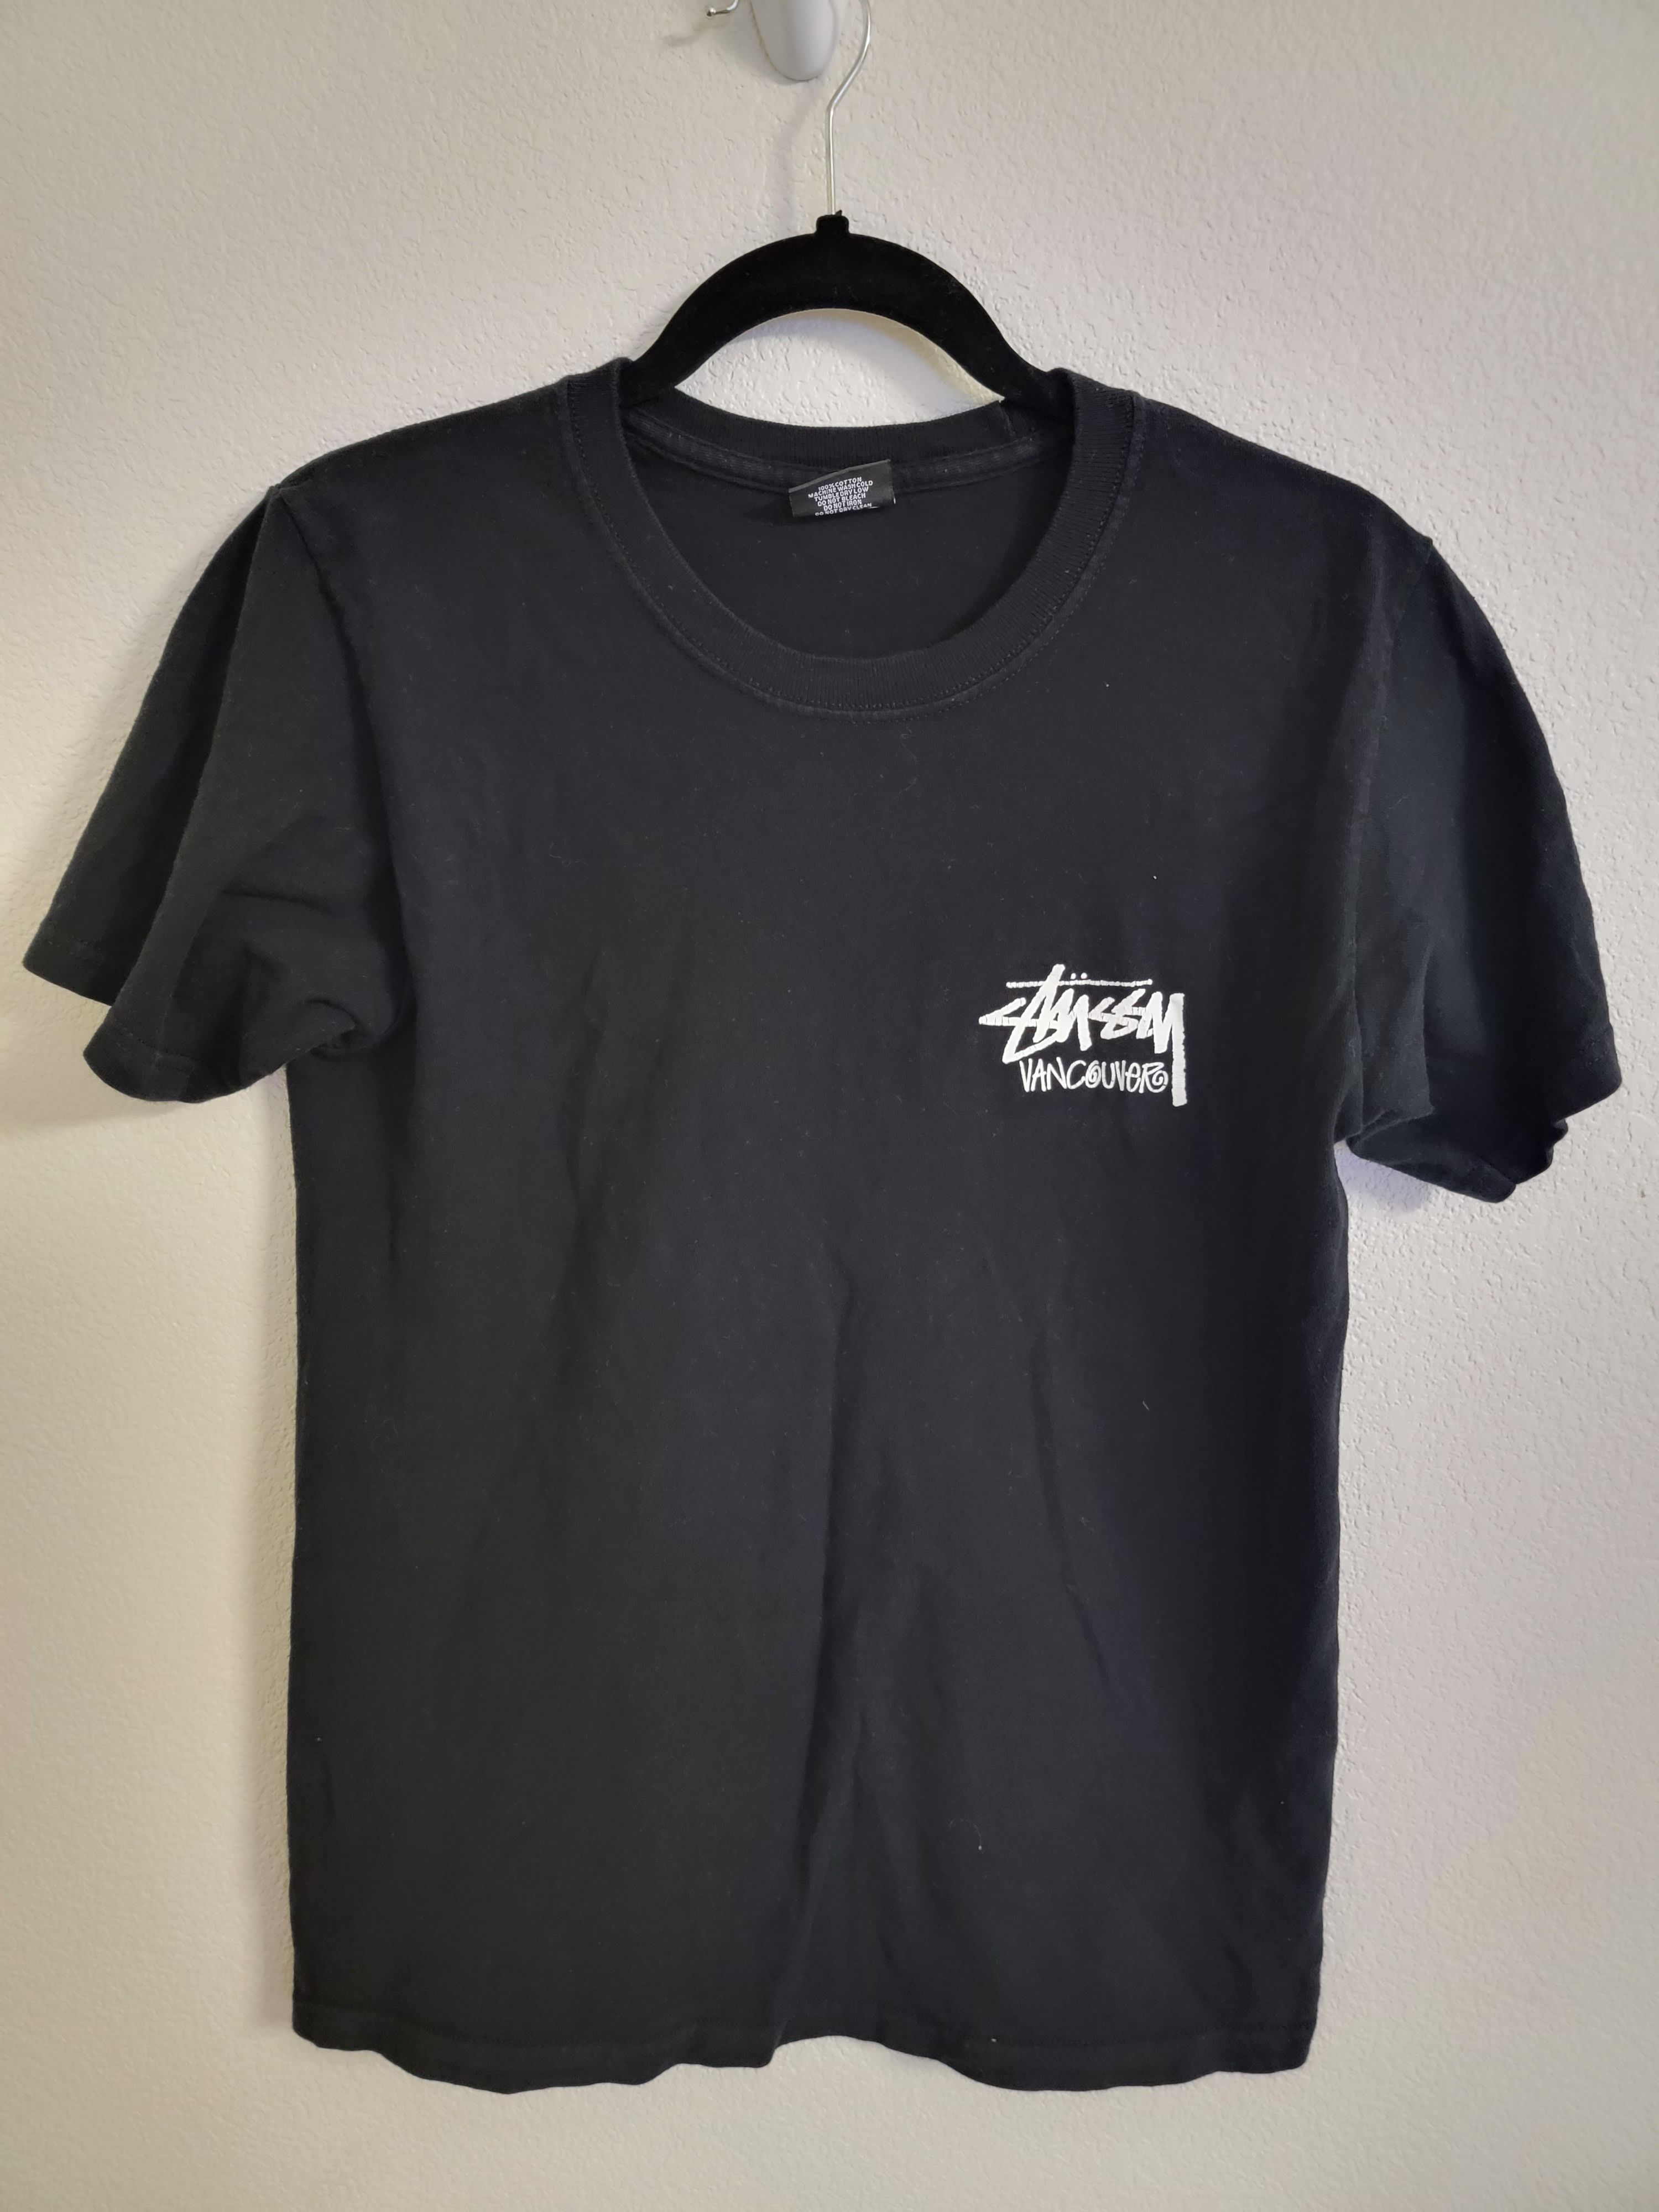 Stussy Stussy Vancouver Chapter T Shirt | Grailed